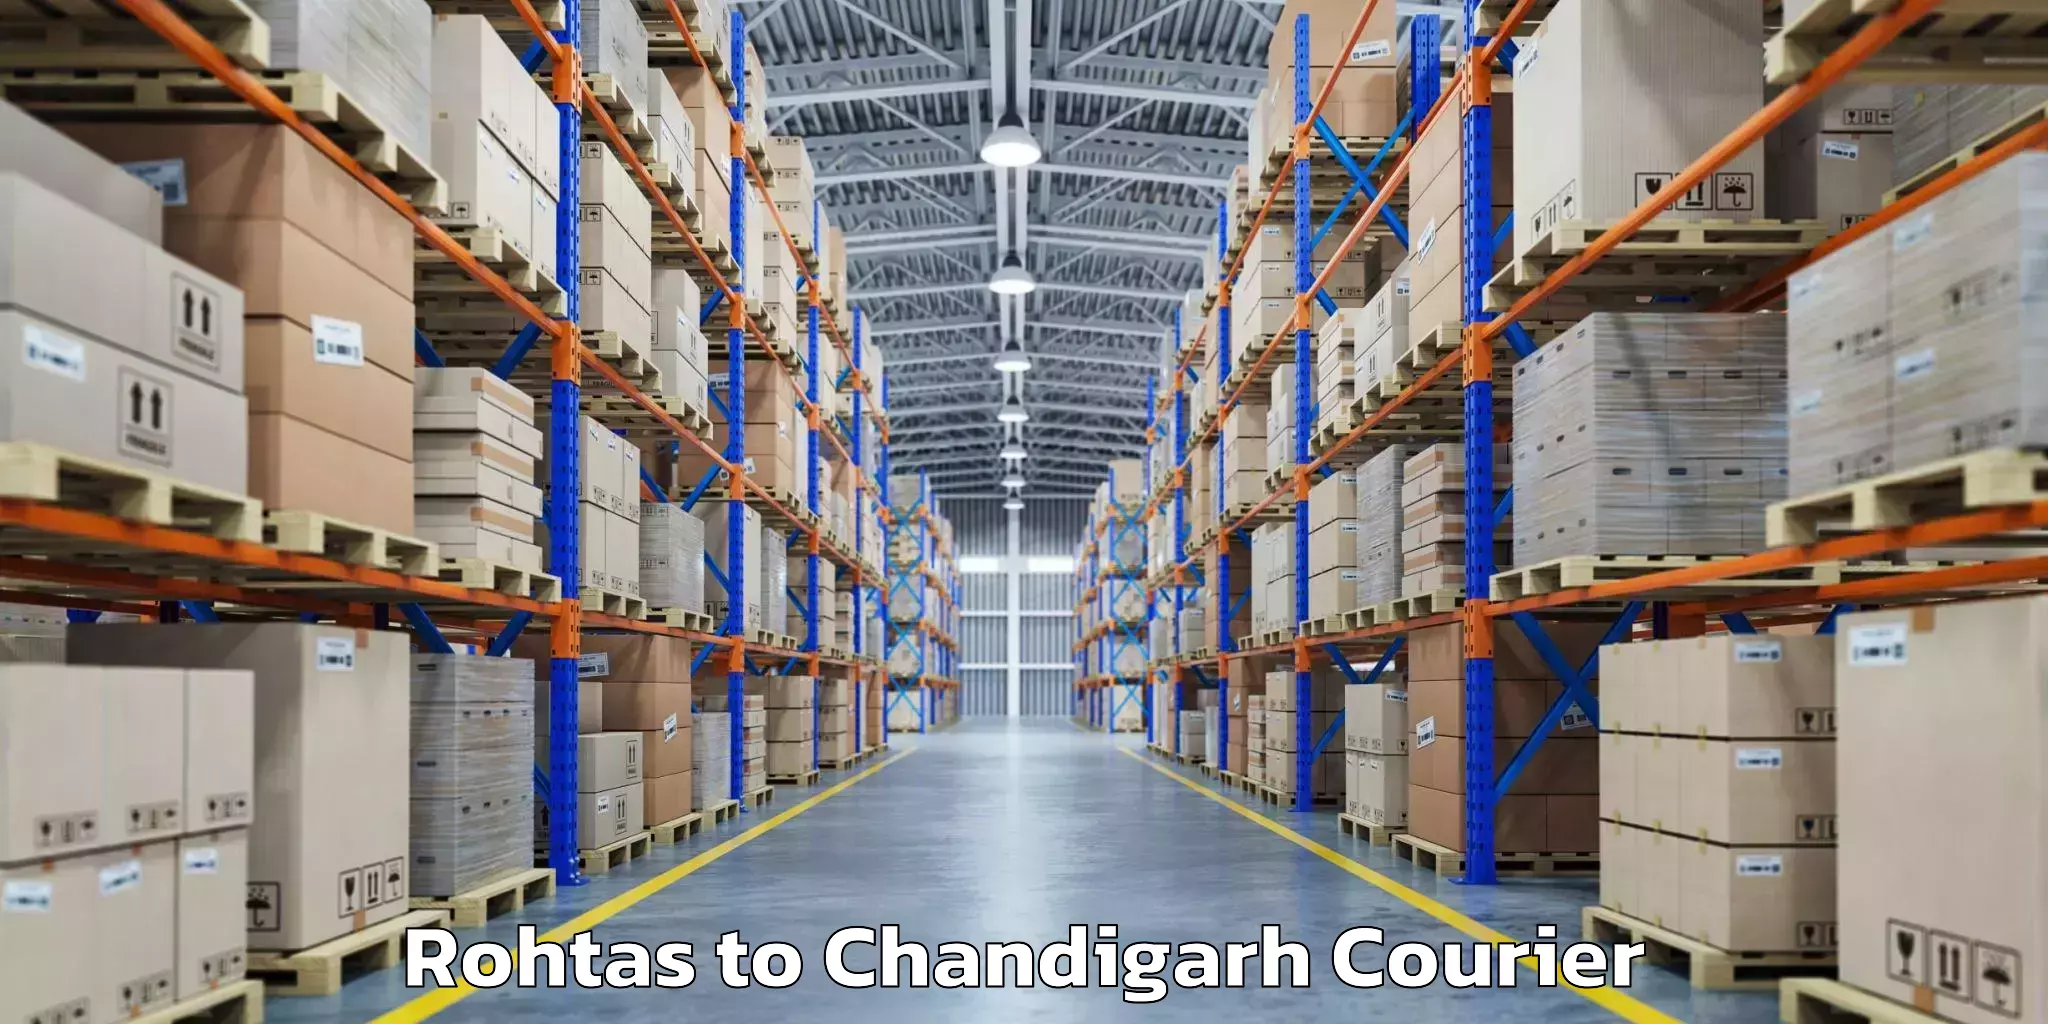 Baggage transport professionals Rohtas to Chandigarh